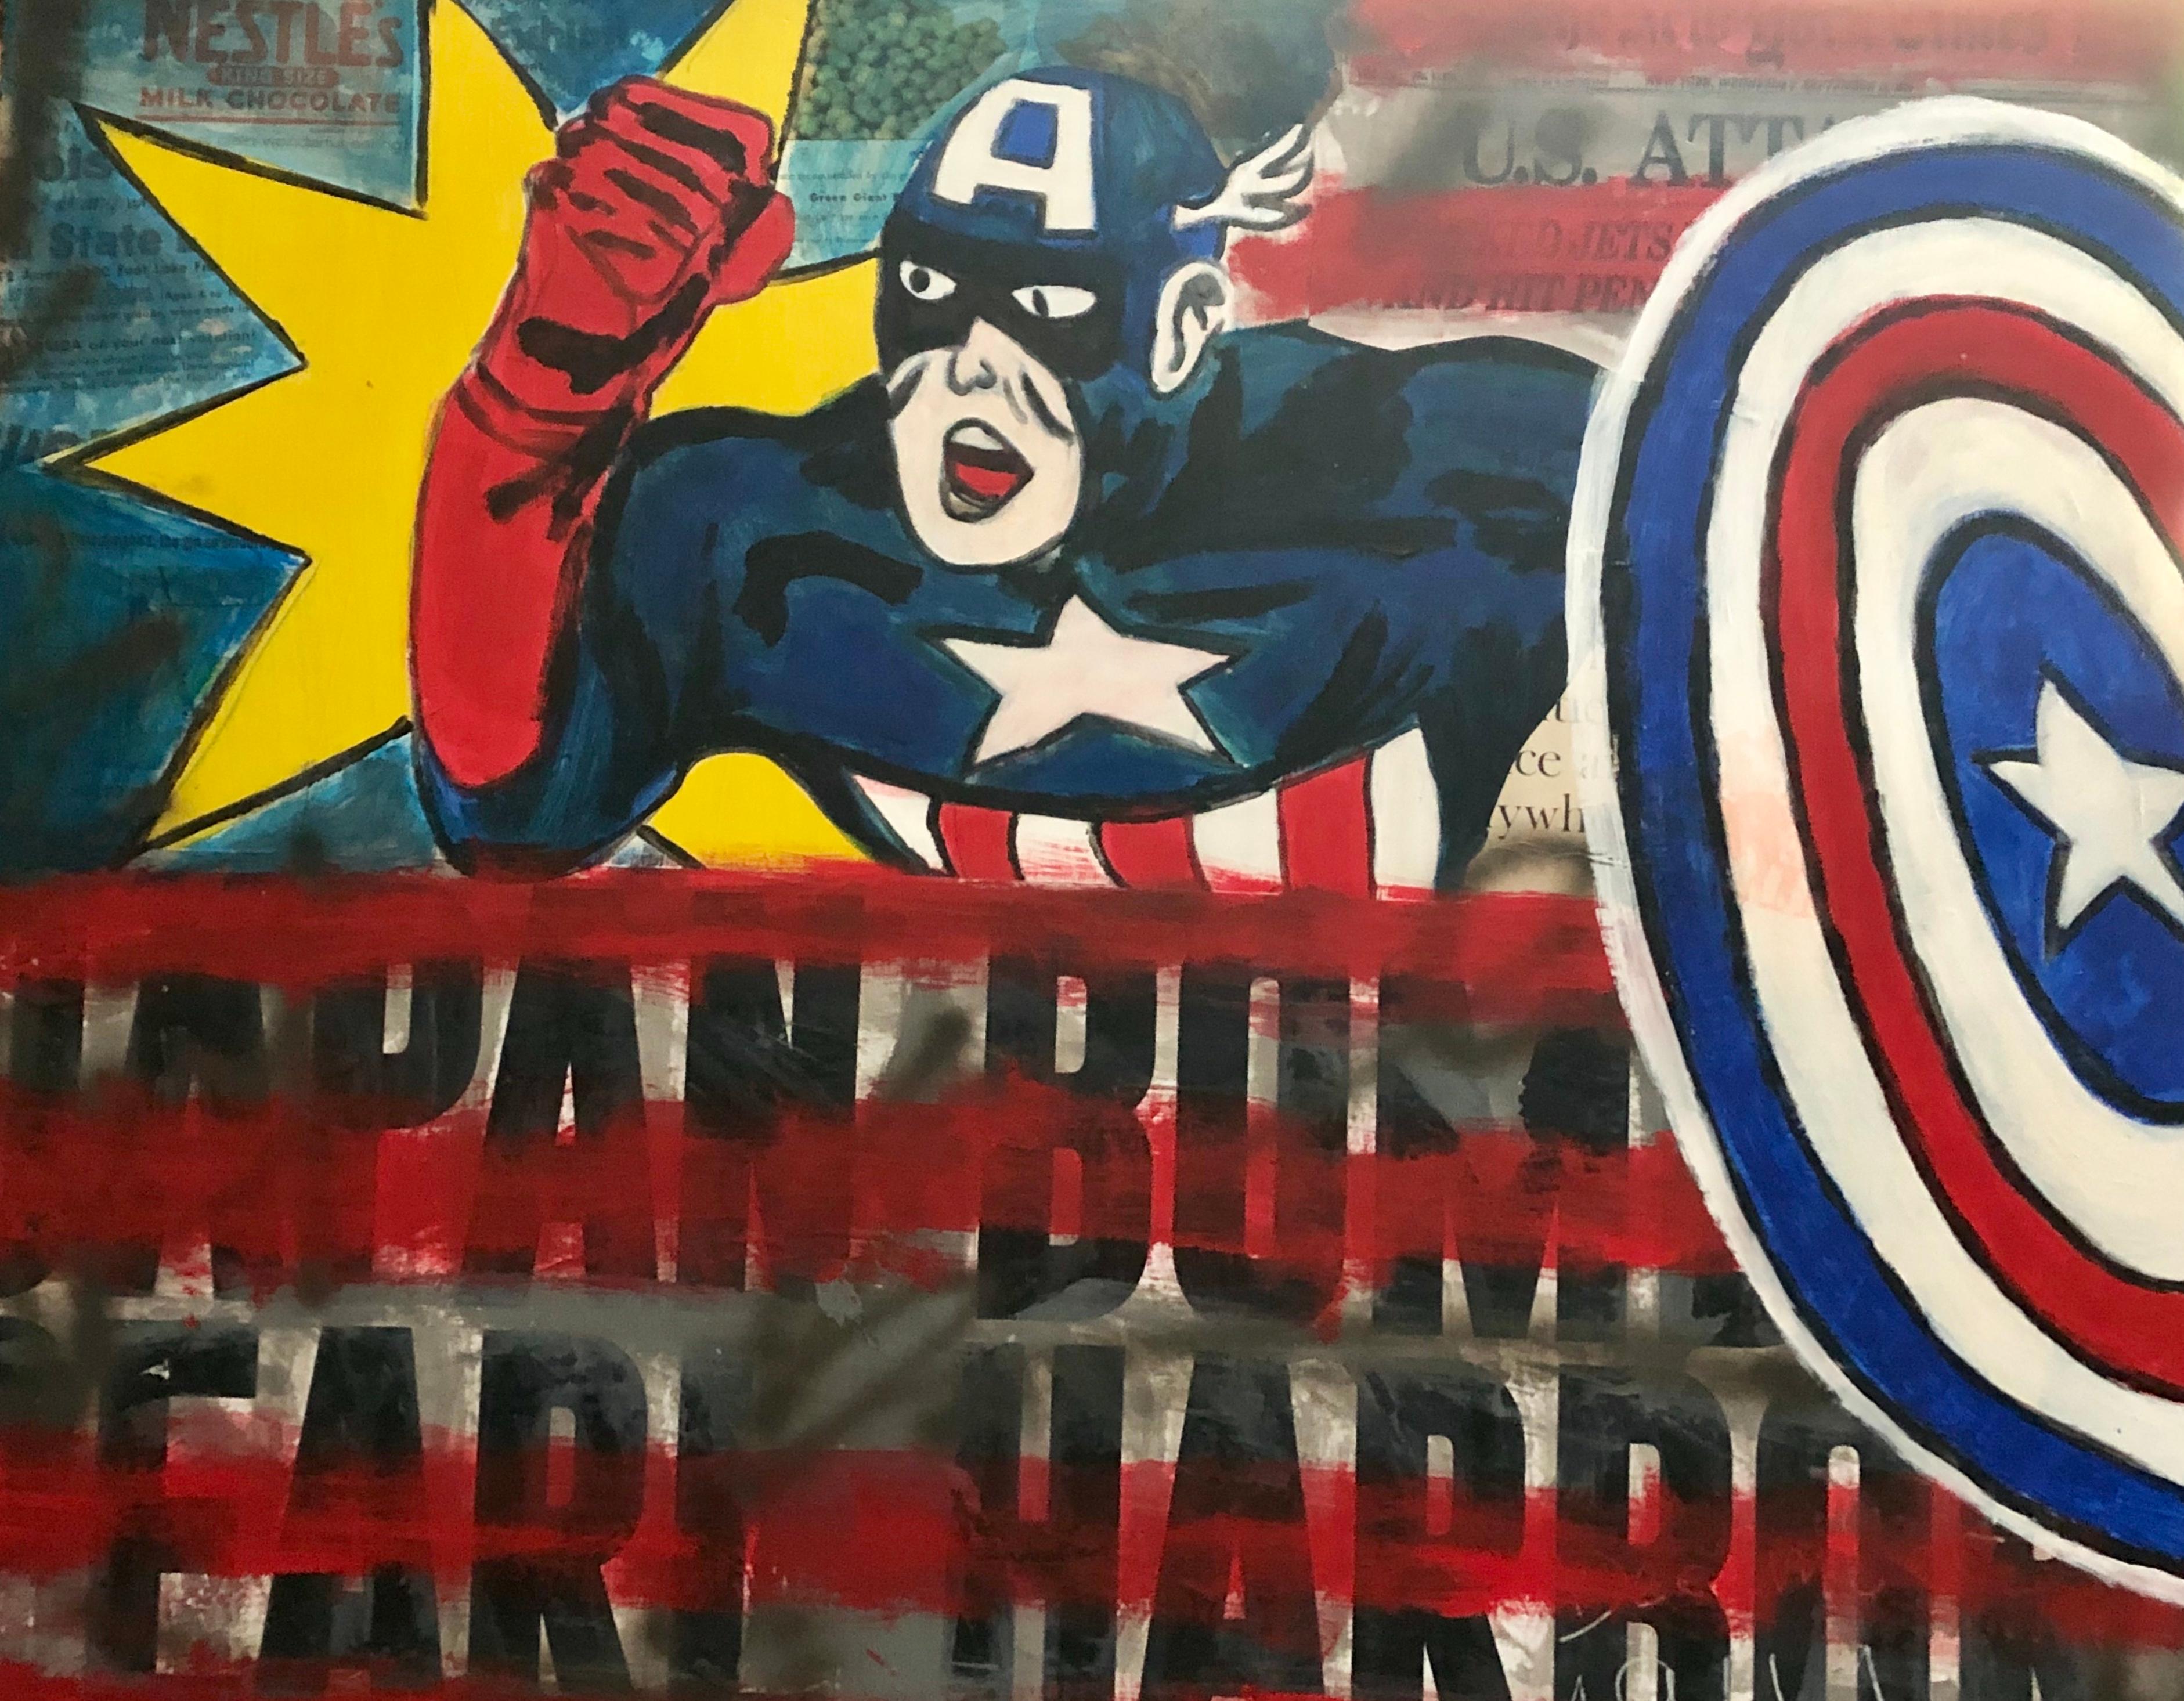 David Morico Figurative Painting - Captain America - SOLD - Commission Available